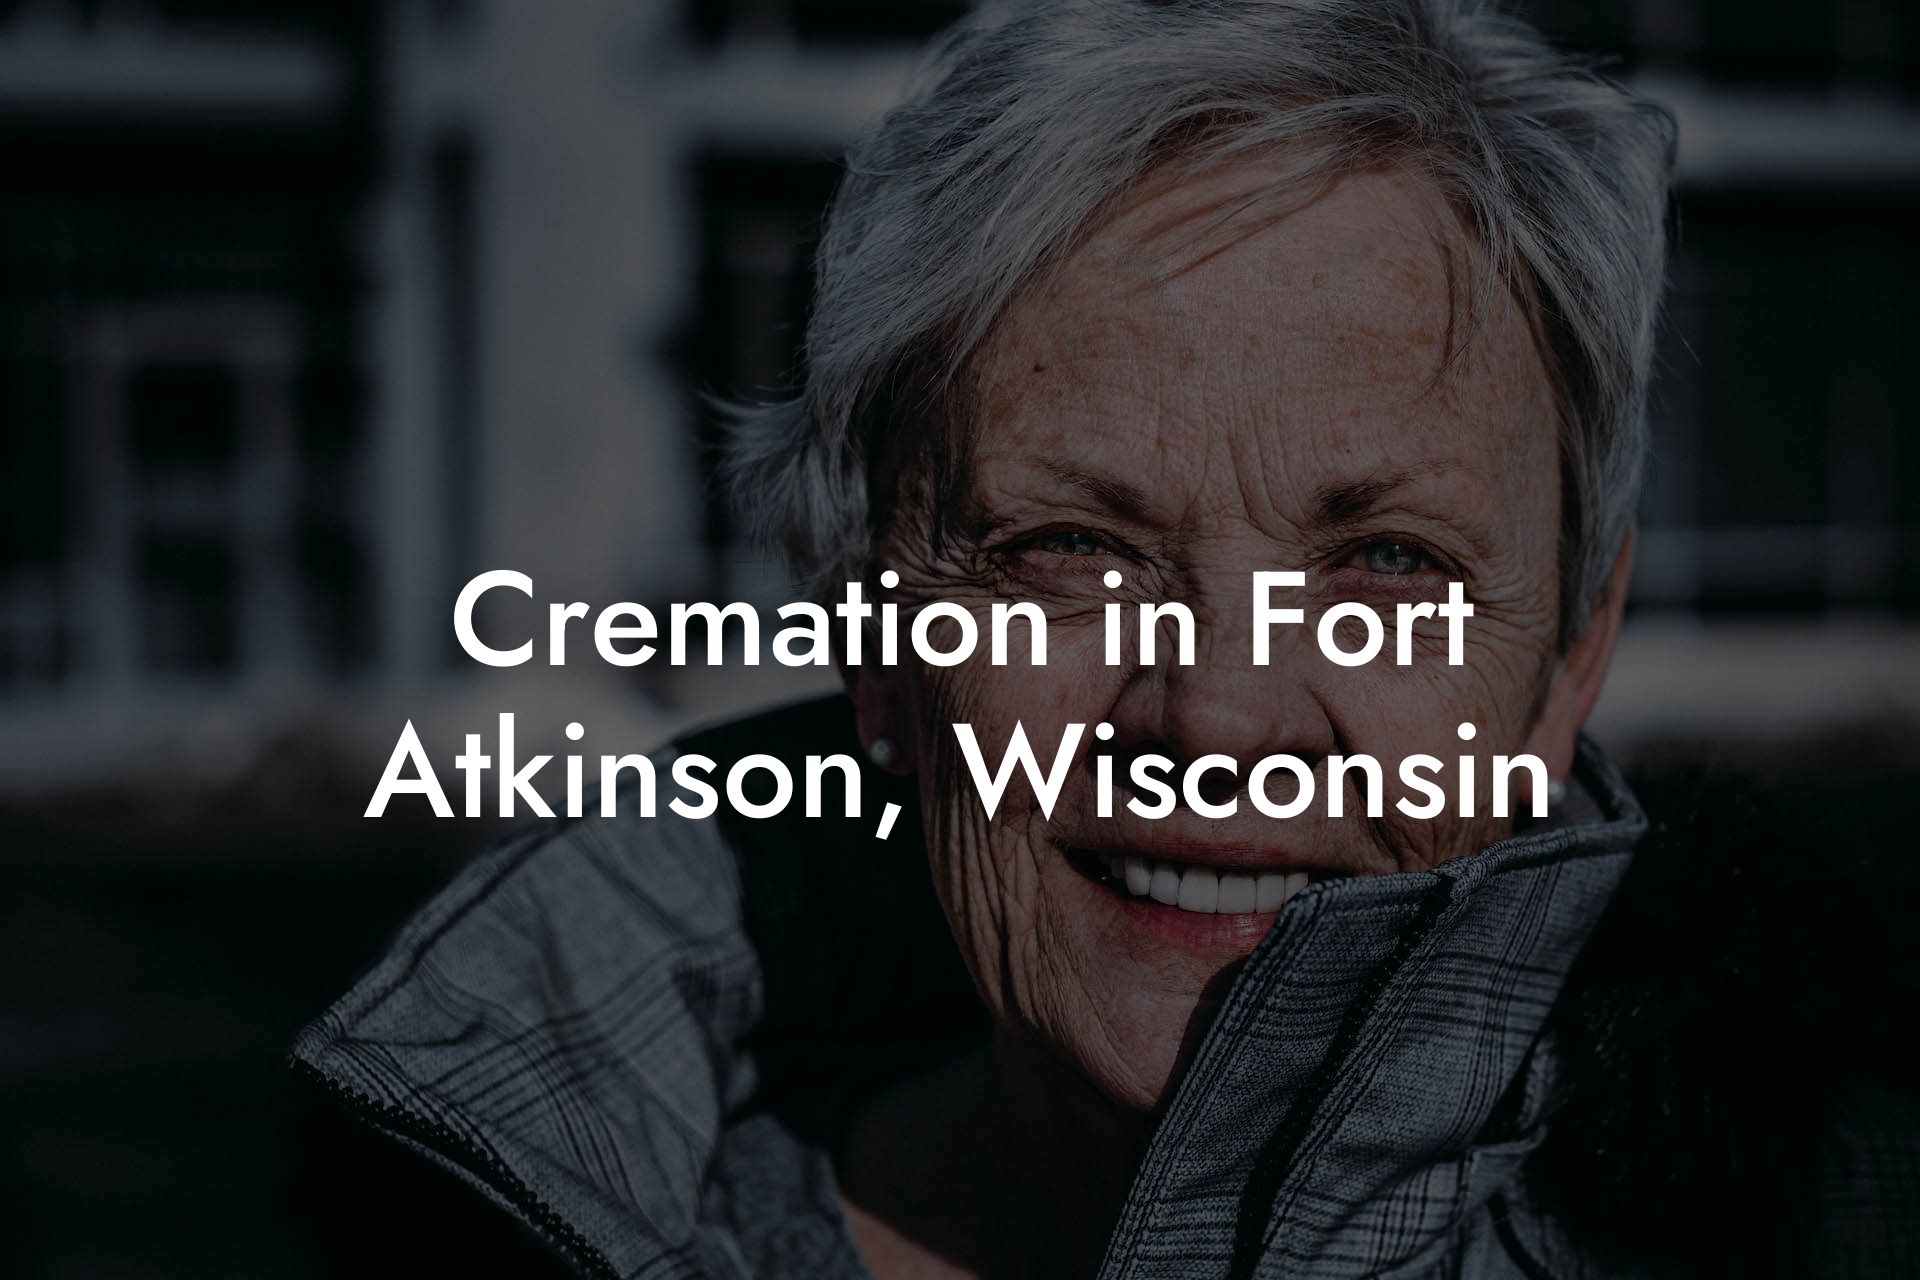 Cremation in Fort Atkinson, Wisconsin